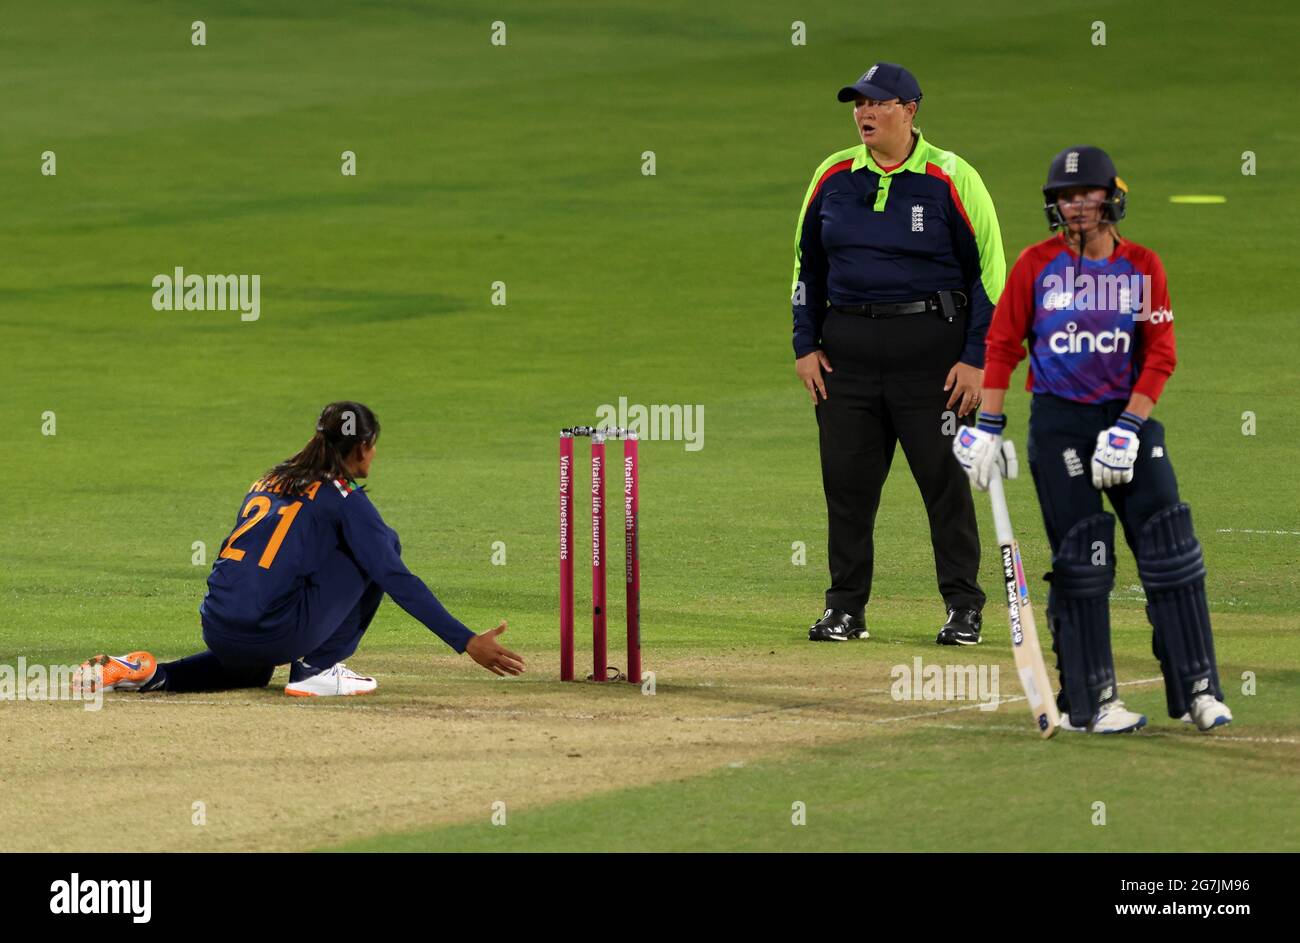 India's Radha Yadav (left) appeals for a wicket unsuccessfully during the  third Vitality IT20 match at The Cloudfm County Ground, Chelmsford. Picture  date: Wednesday July 14, 2021 Stock Photo - Alamy